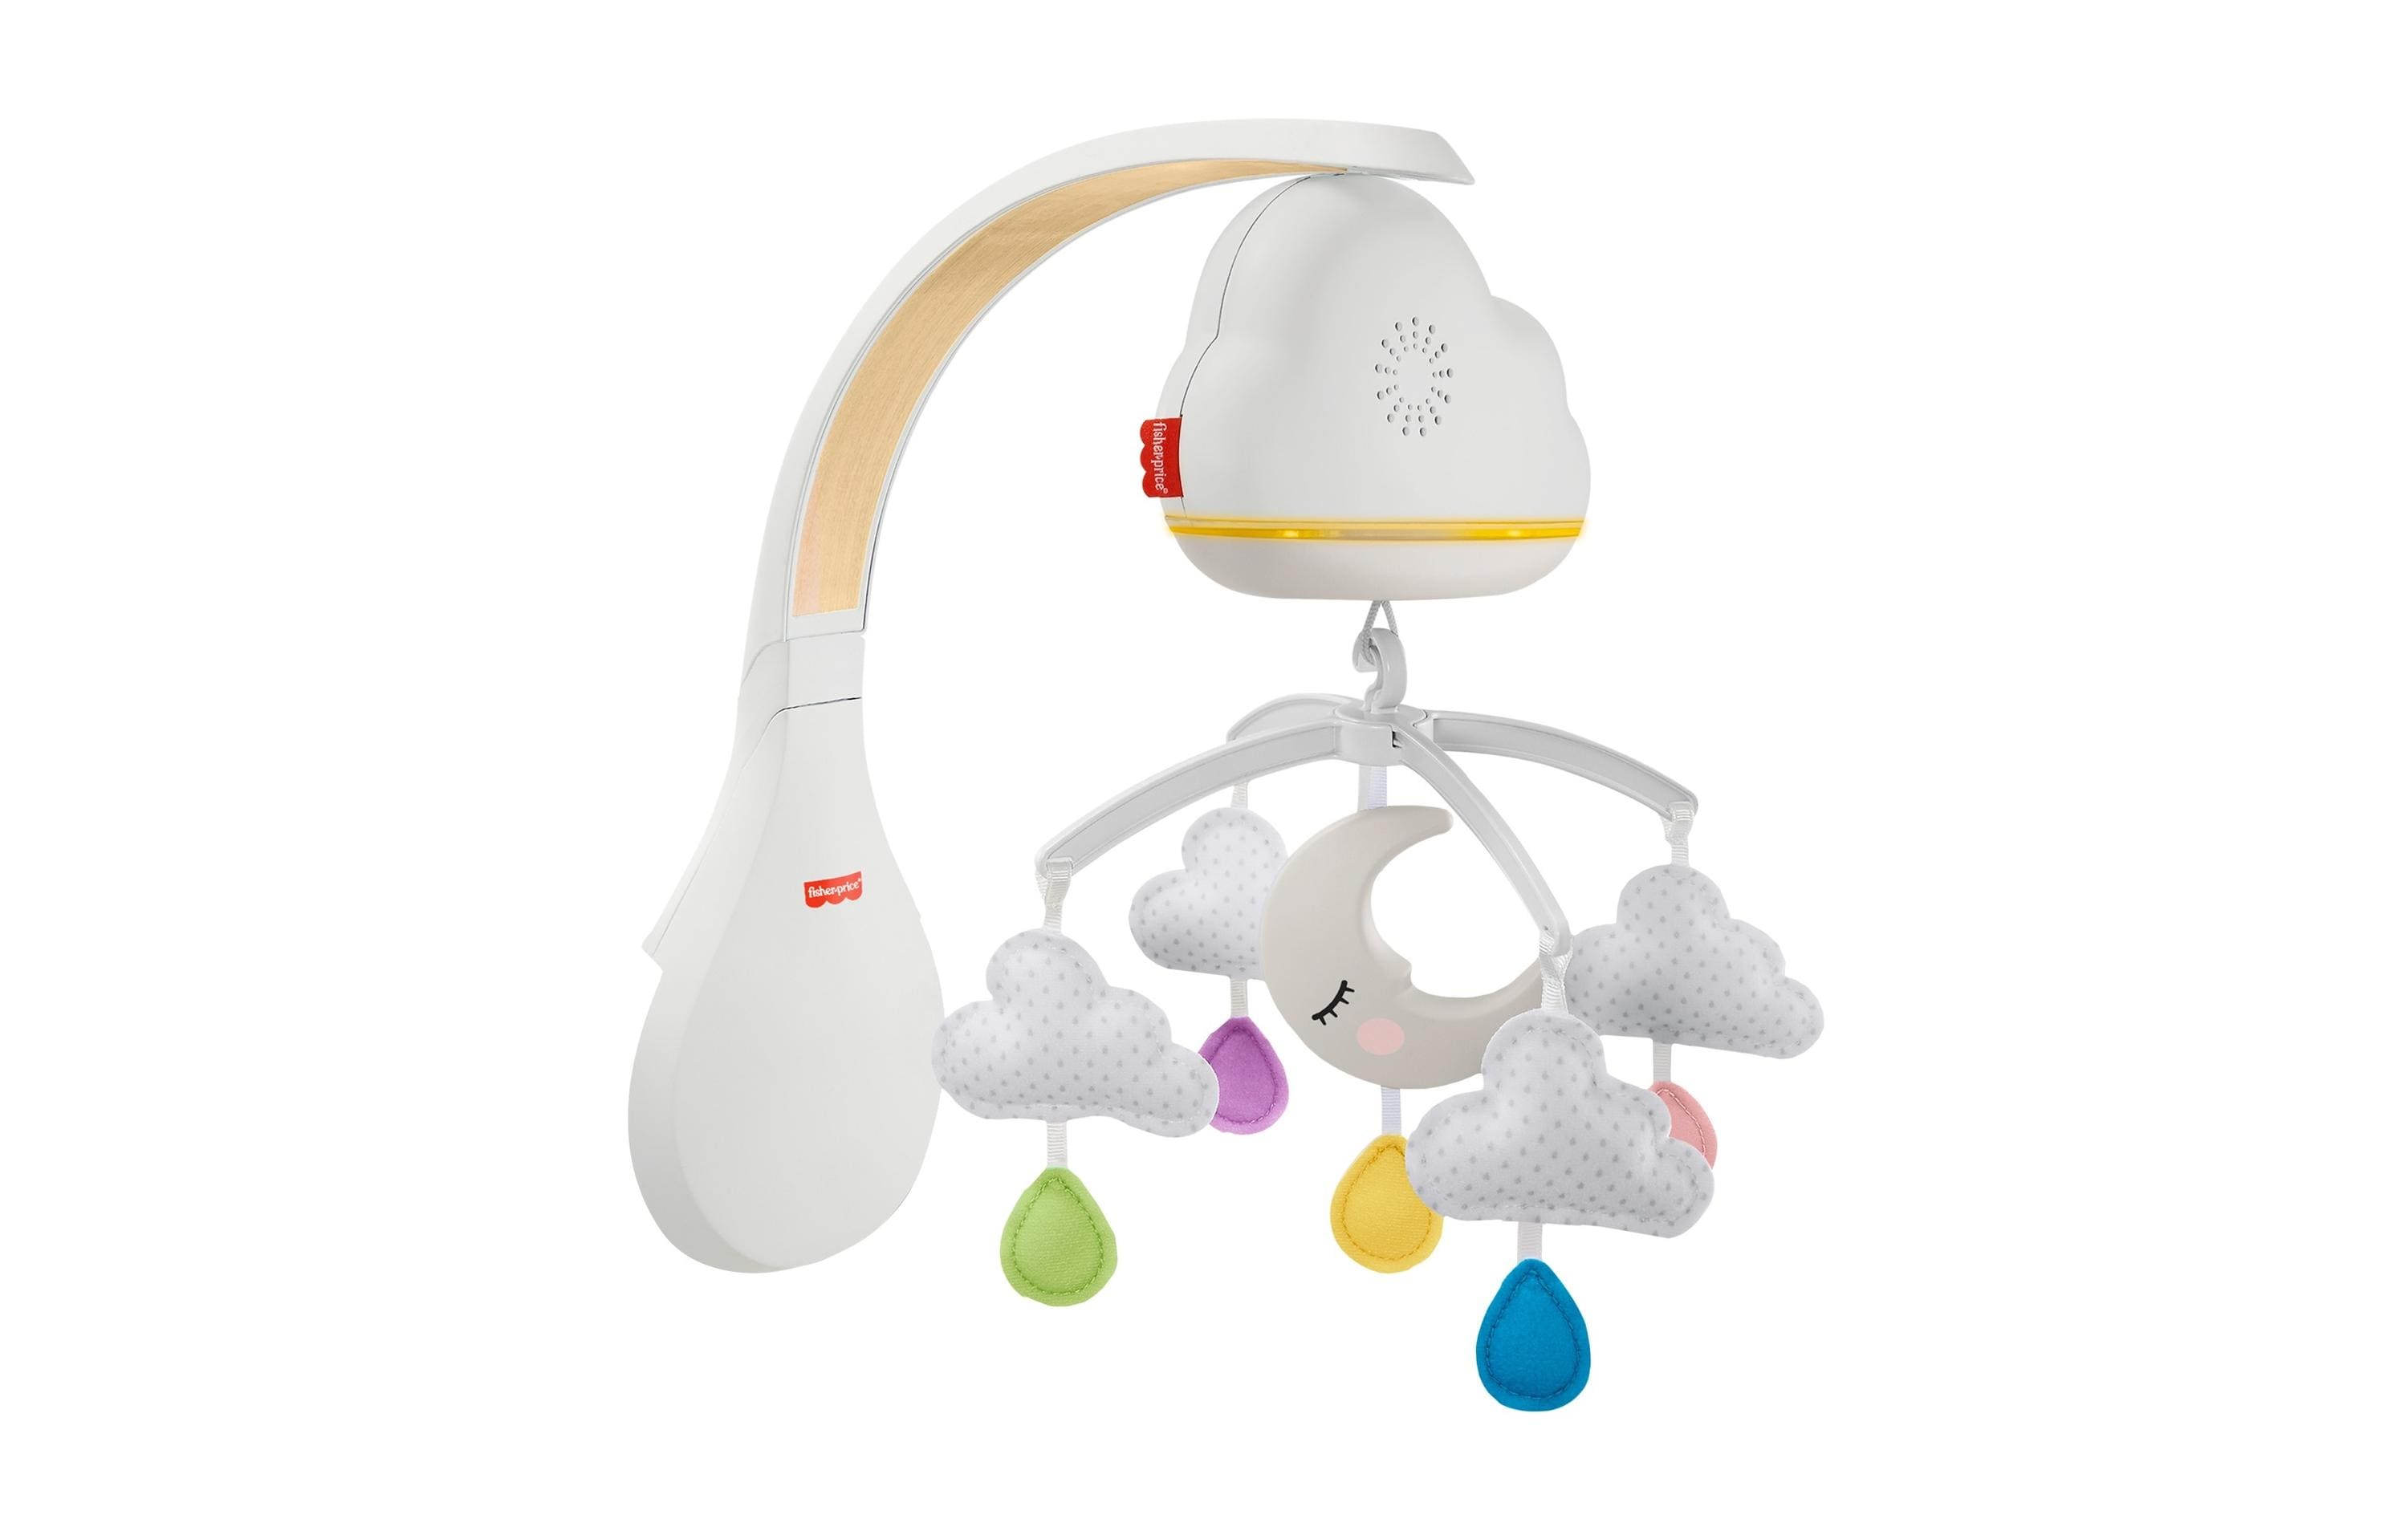 Fisher-Price Mobile Traumhaftes Wolken-Mobile Weiss